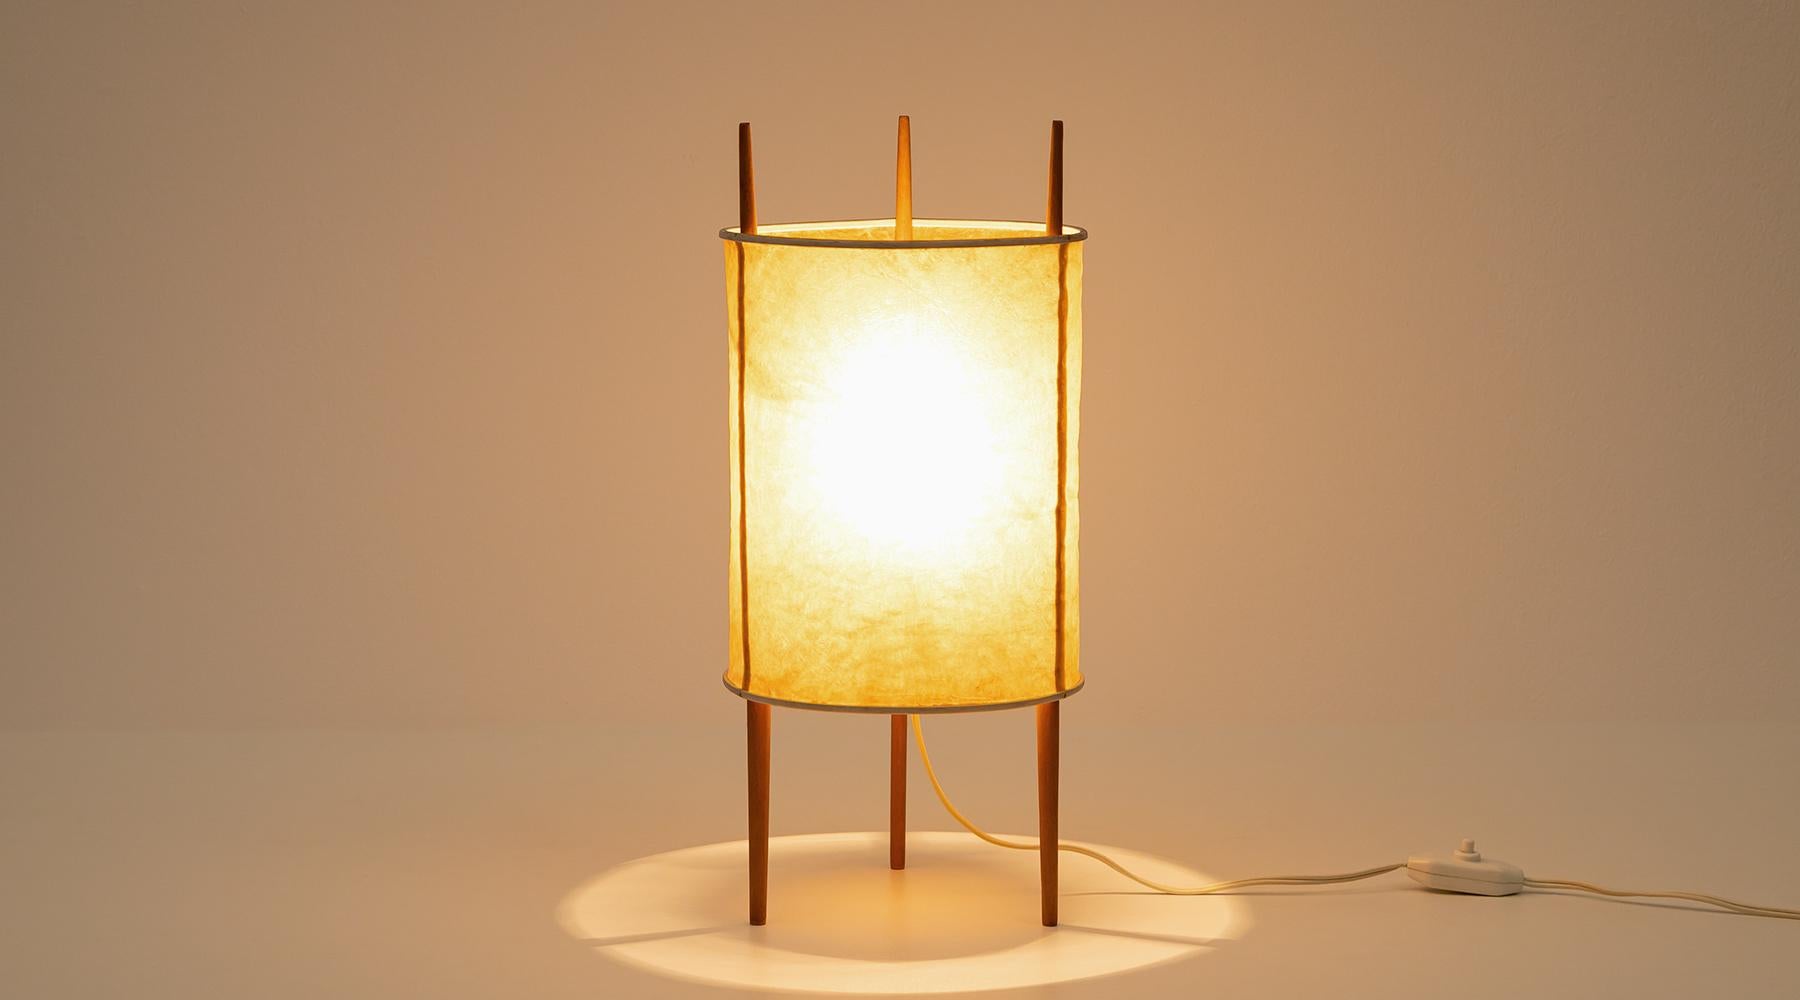 Sculptural light, table lamp by Isamu Noguchi, USA, 1947.

Beautiful table lamp by Isamu Noguchi. The shade is made out of fiberglas-reinforced polyvinyl and stands on three wooden sticks. The lamp promises a very warm, pleasant light.